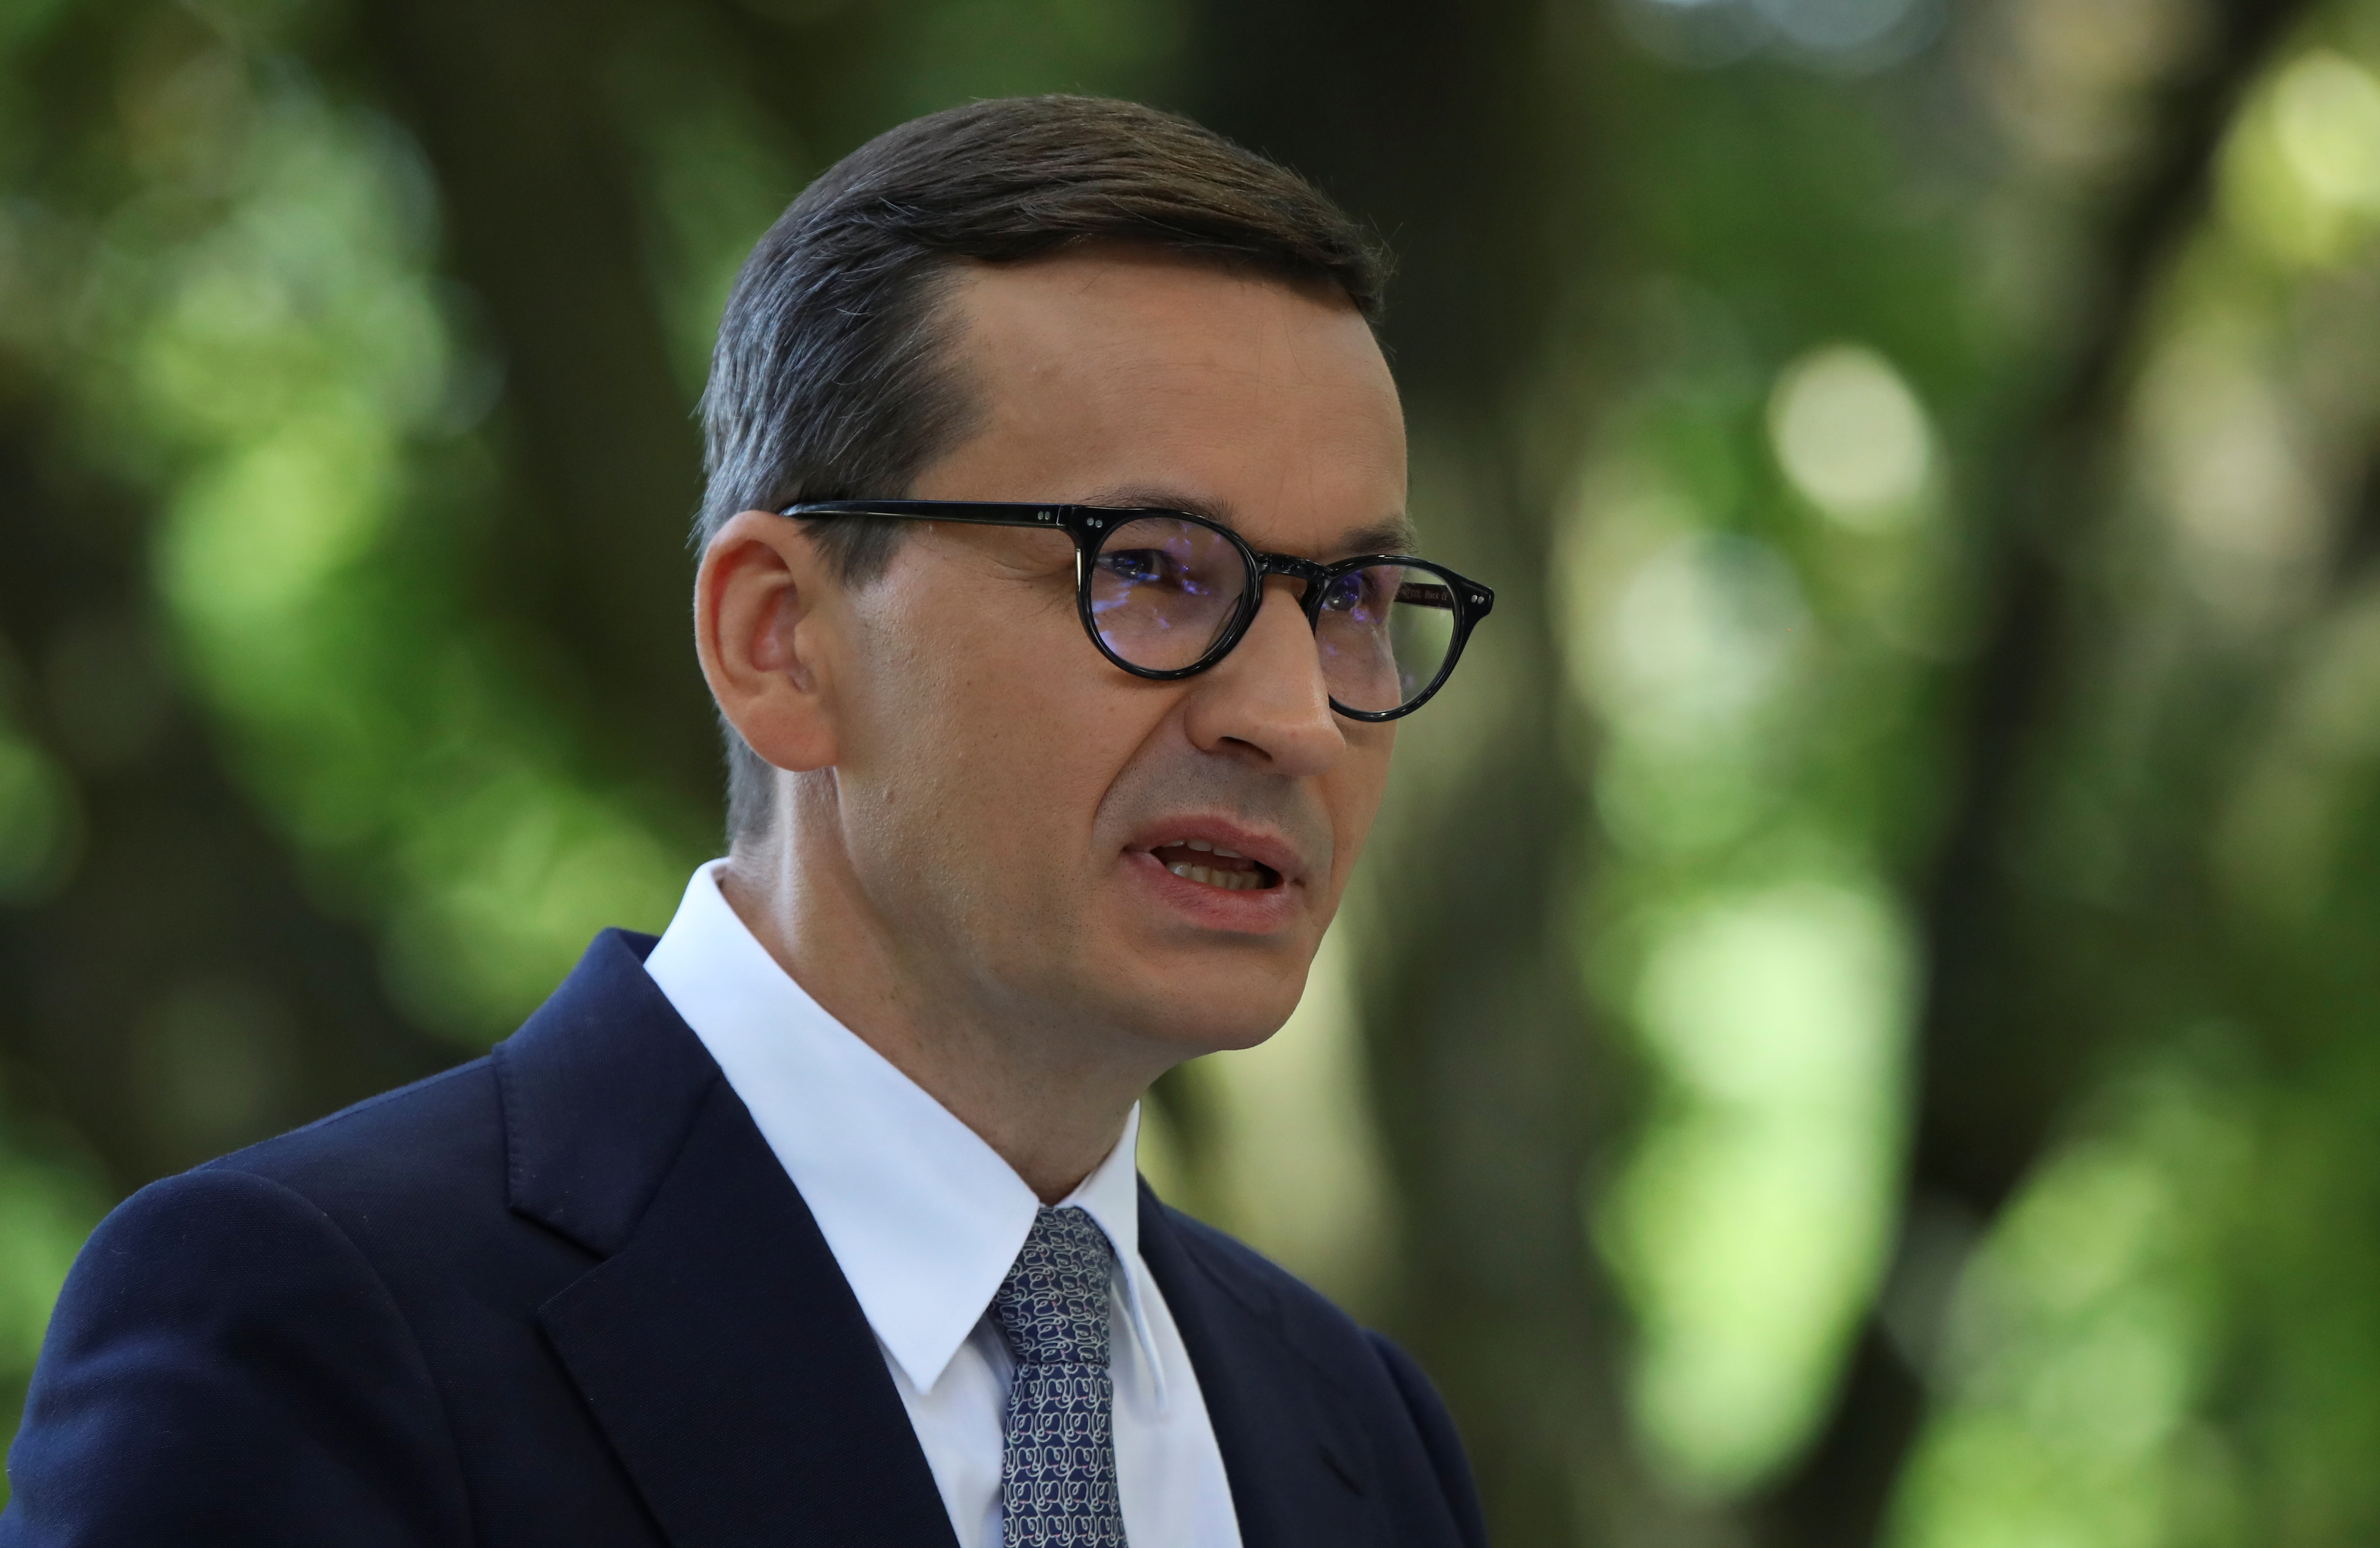 Polish Prime Minister Mateusz Morawiecki speaks during news conference with German Chancellor Angela Merkel after their meeting in Royal Lazienki Park in Warsaw, Poland, September 11, 2021. REUTERS/Kacper Pempel